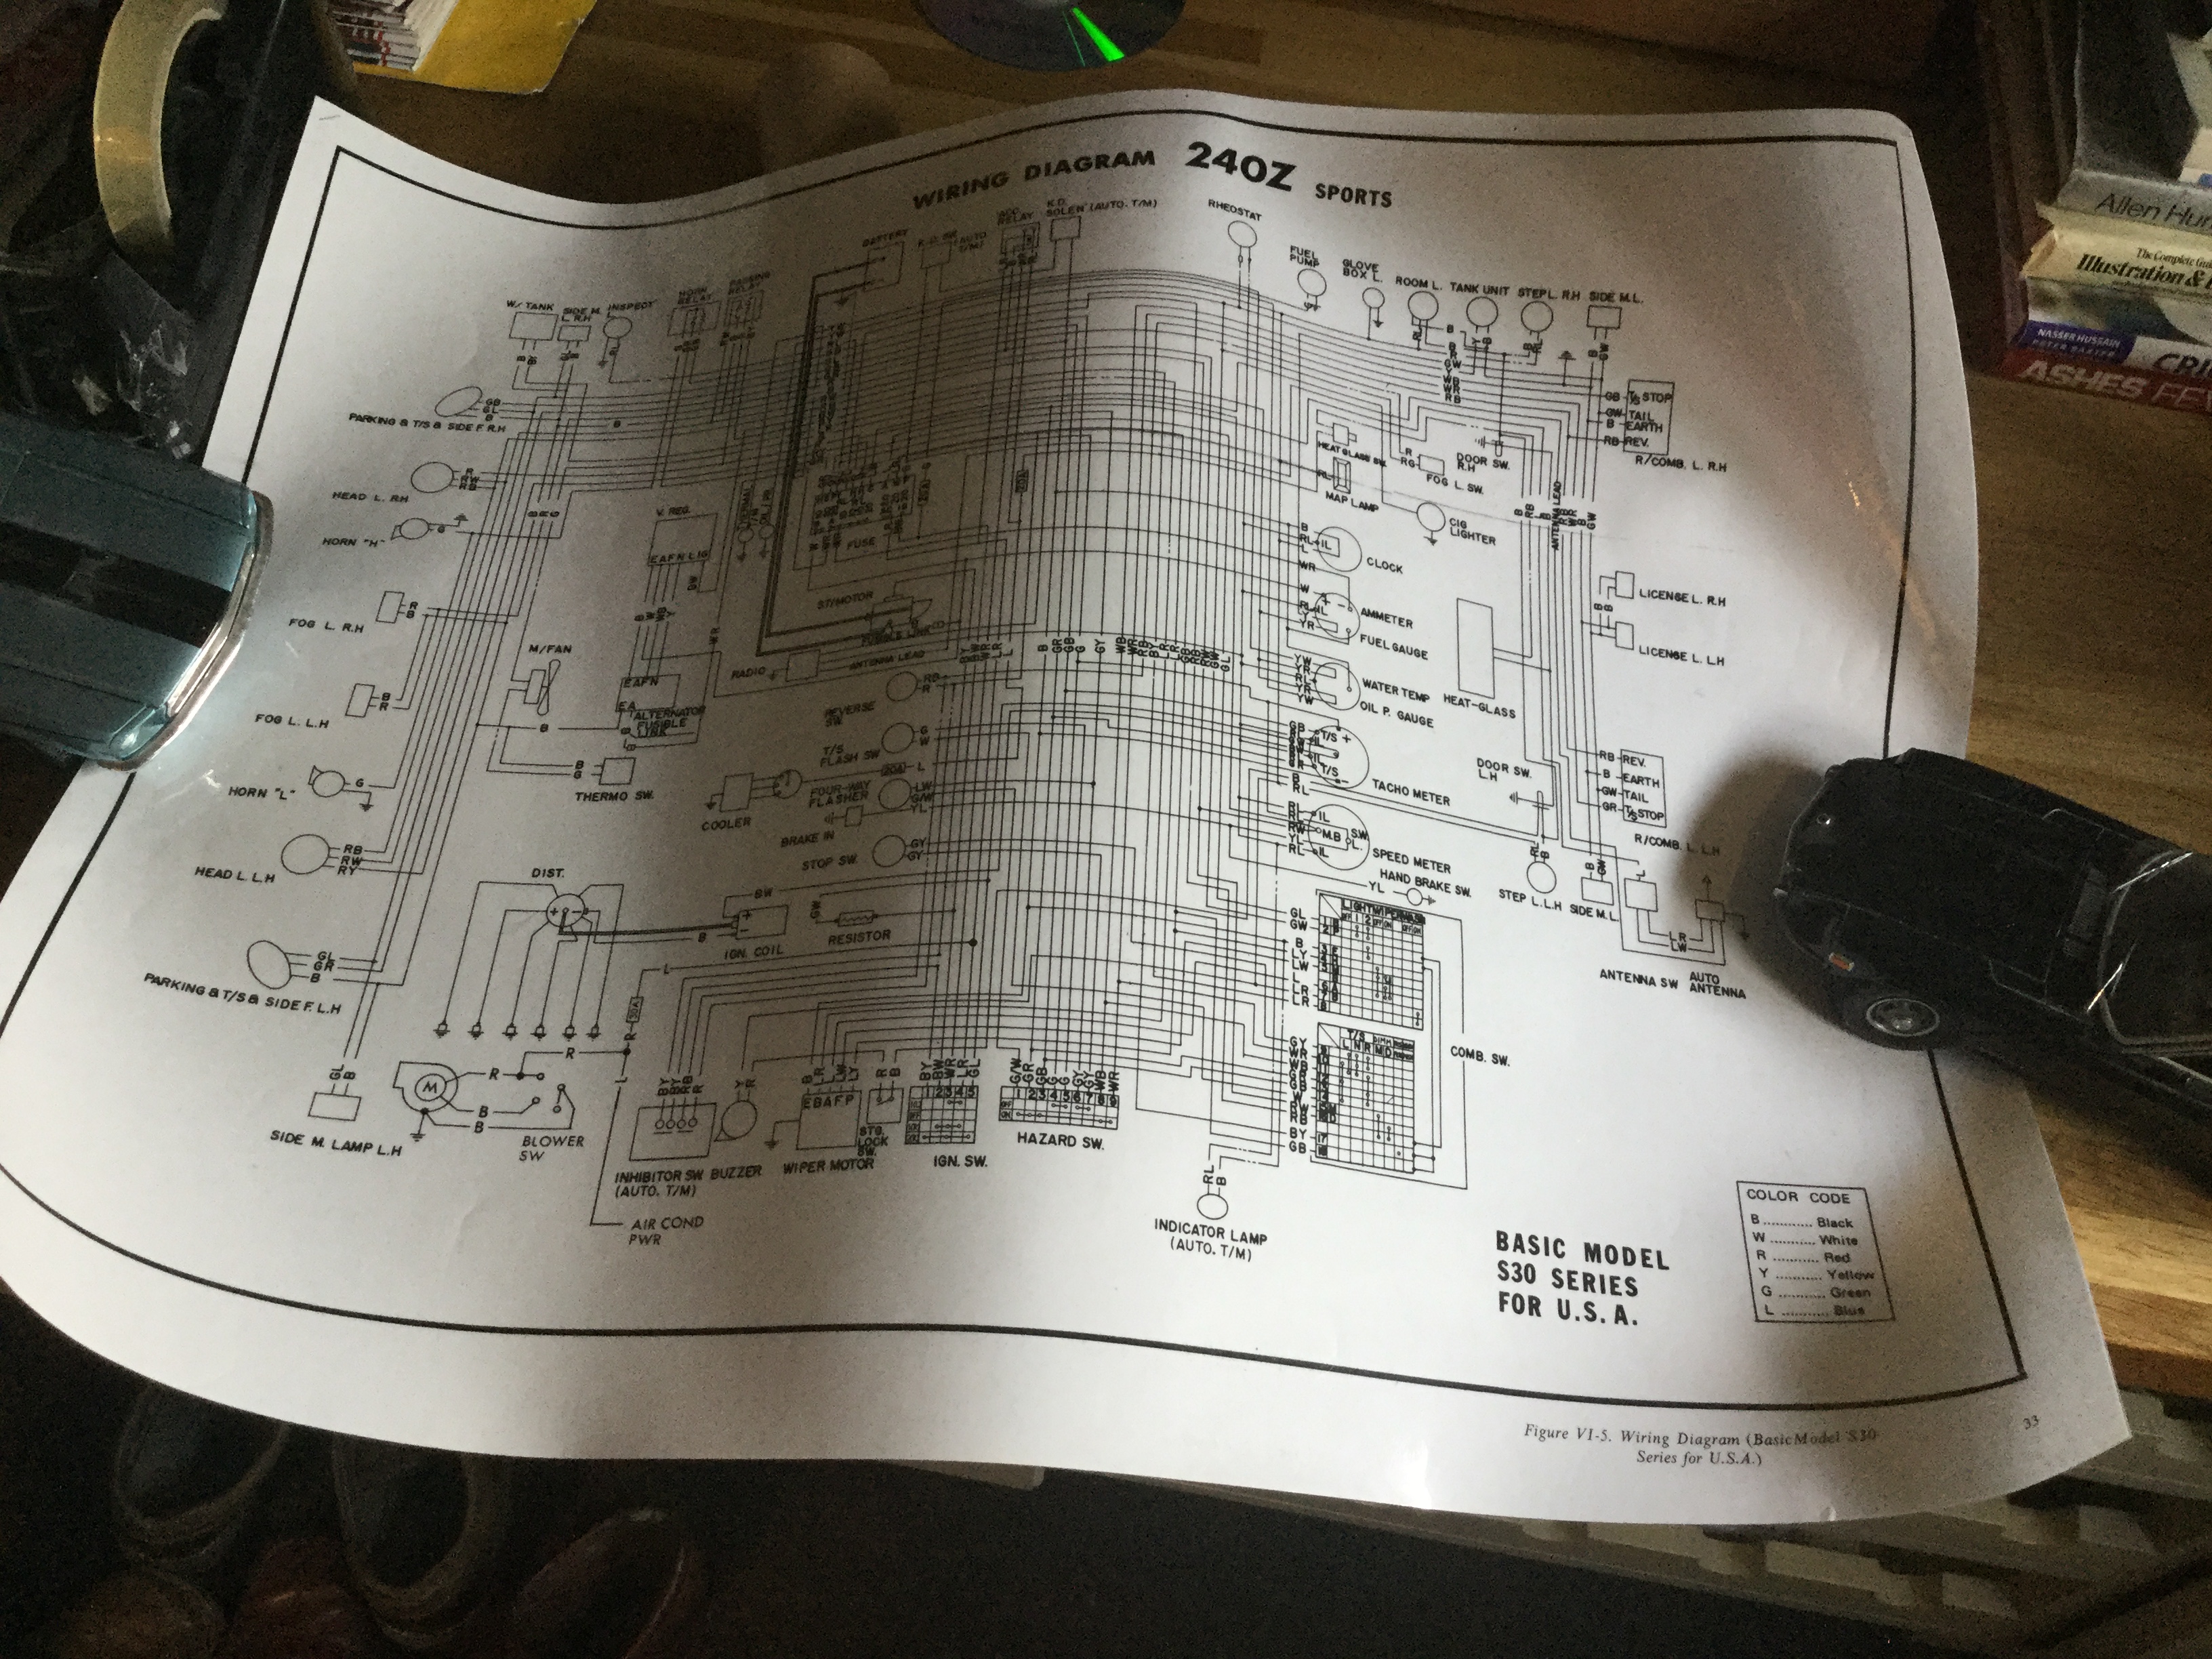 240Z Wiring Diagram from thumbsnap.com